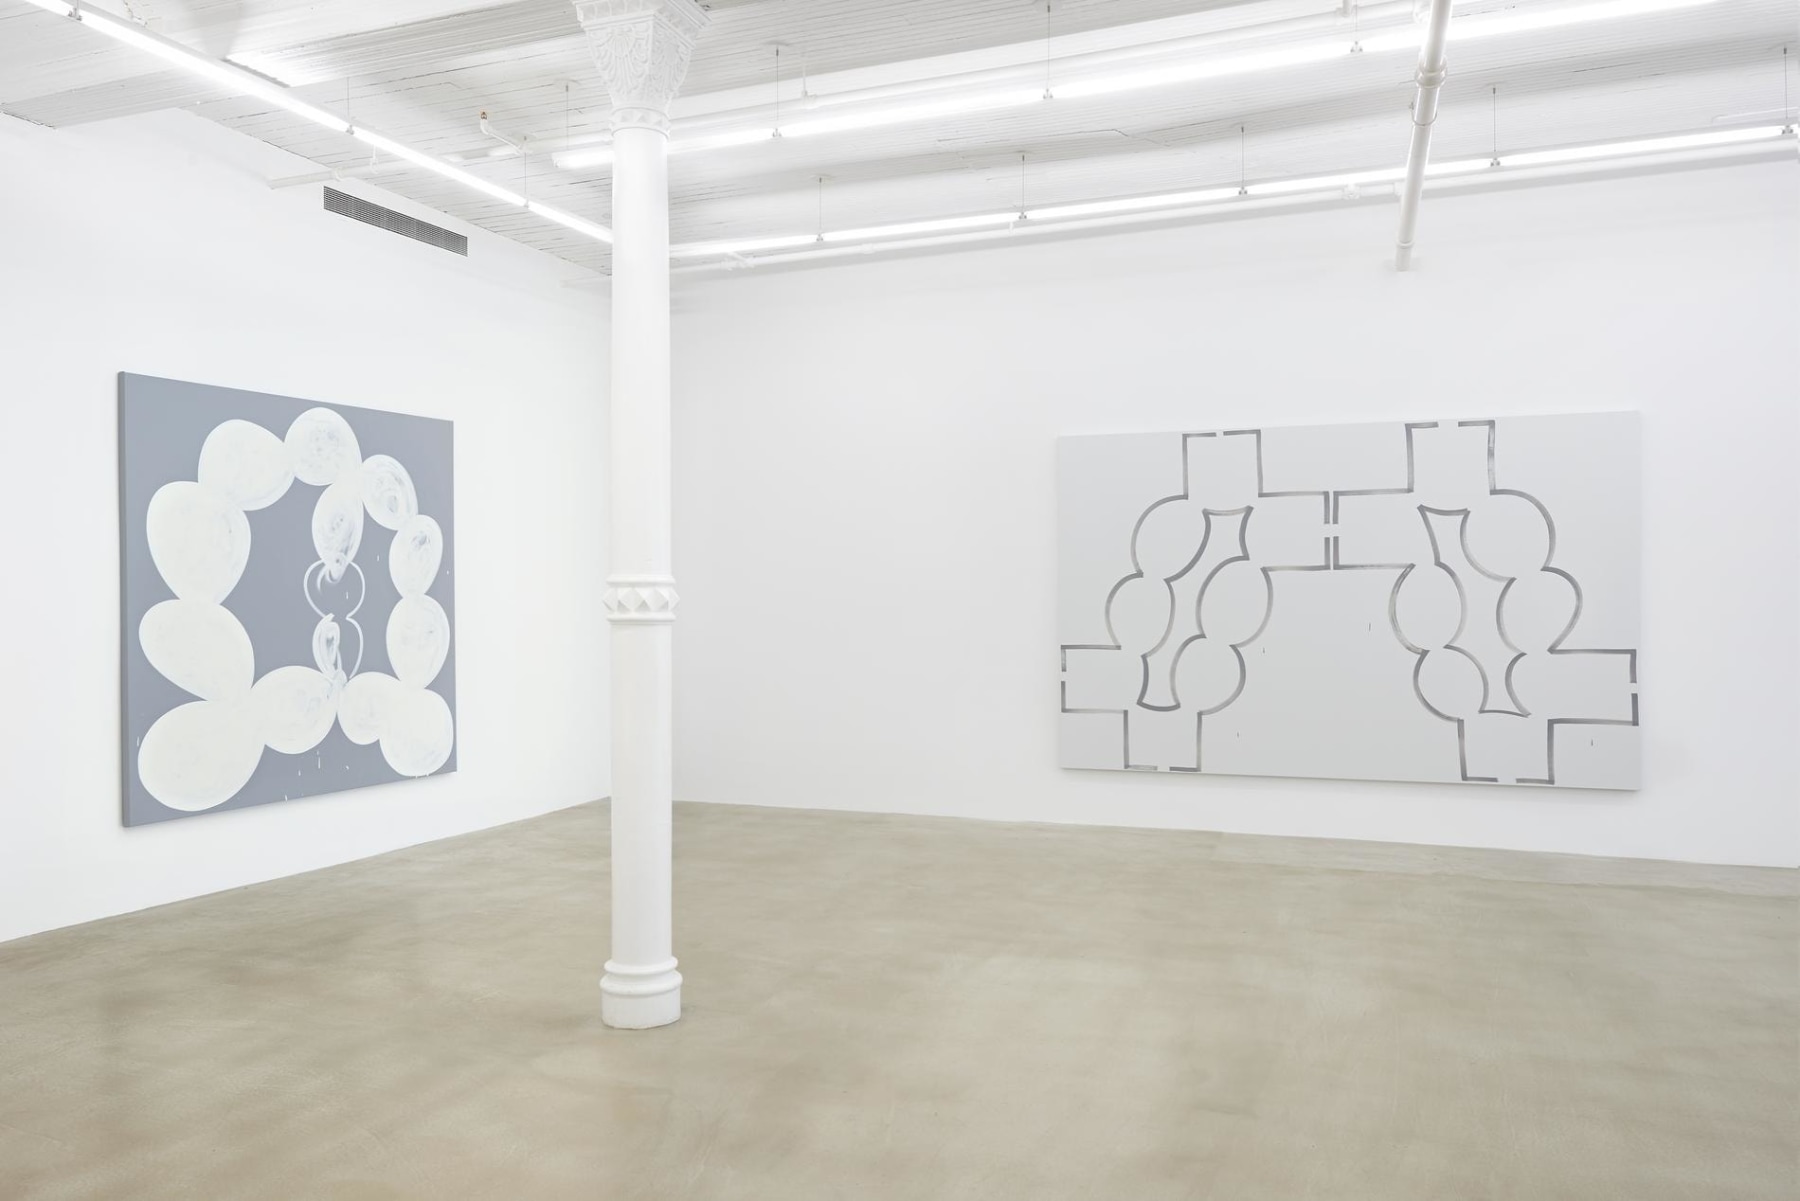 installation image of two artworks